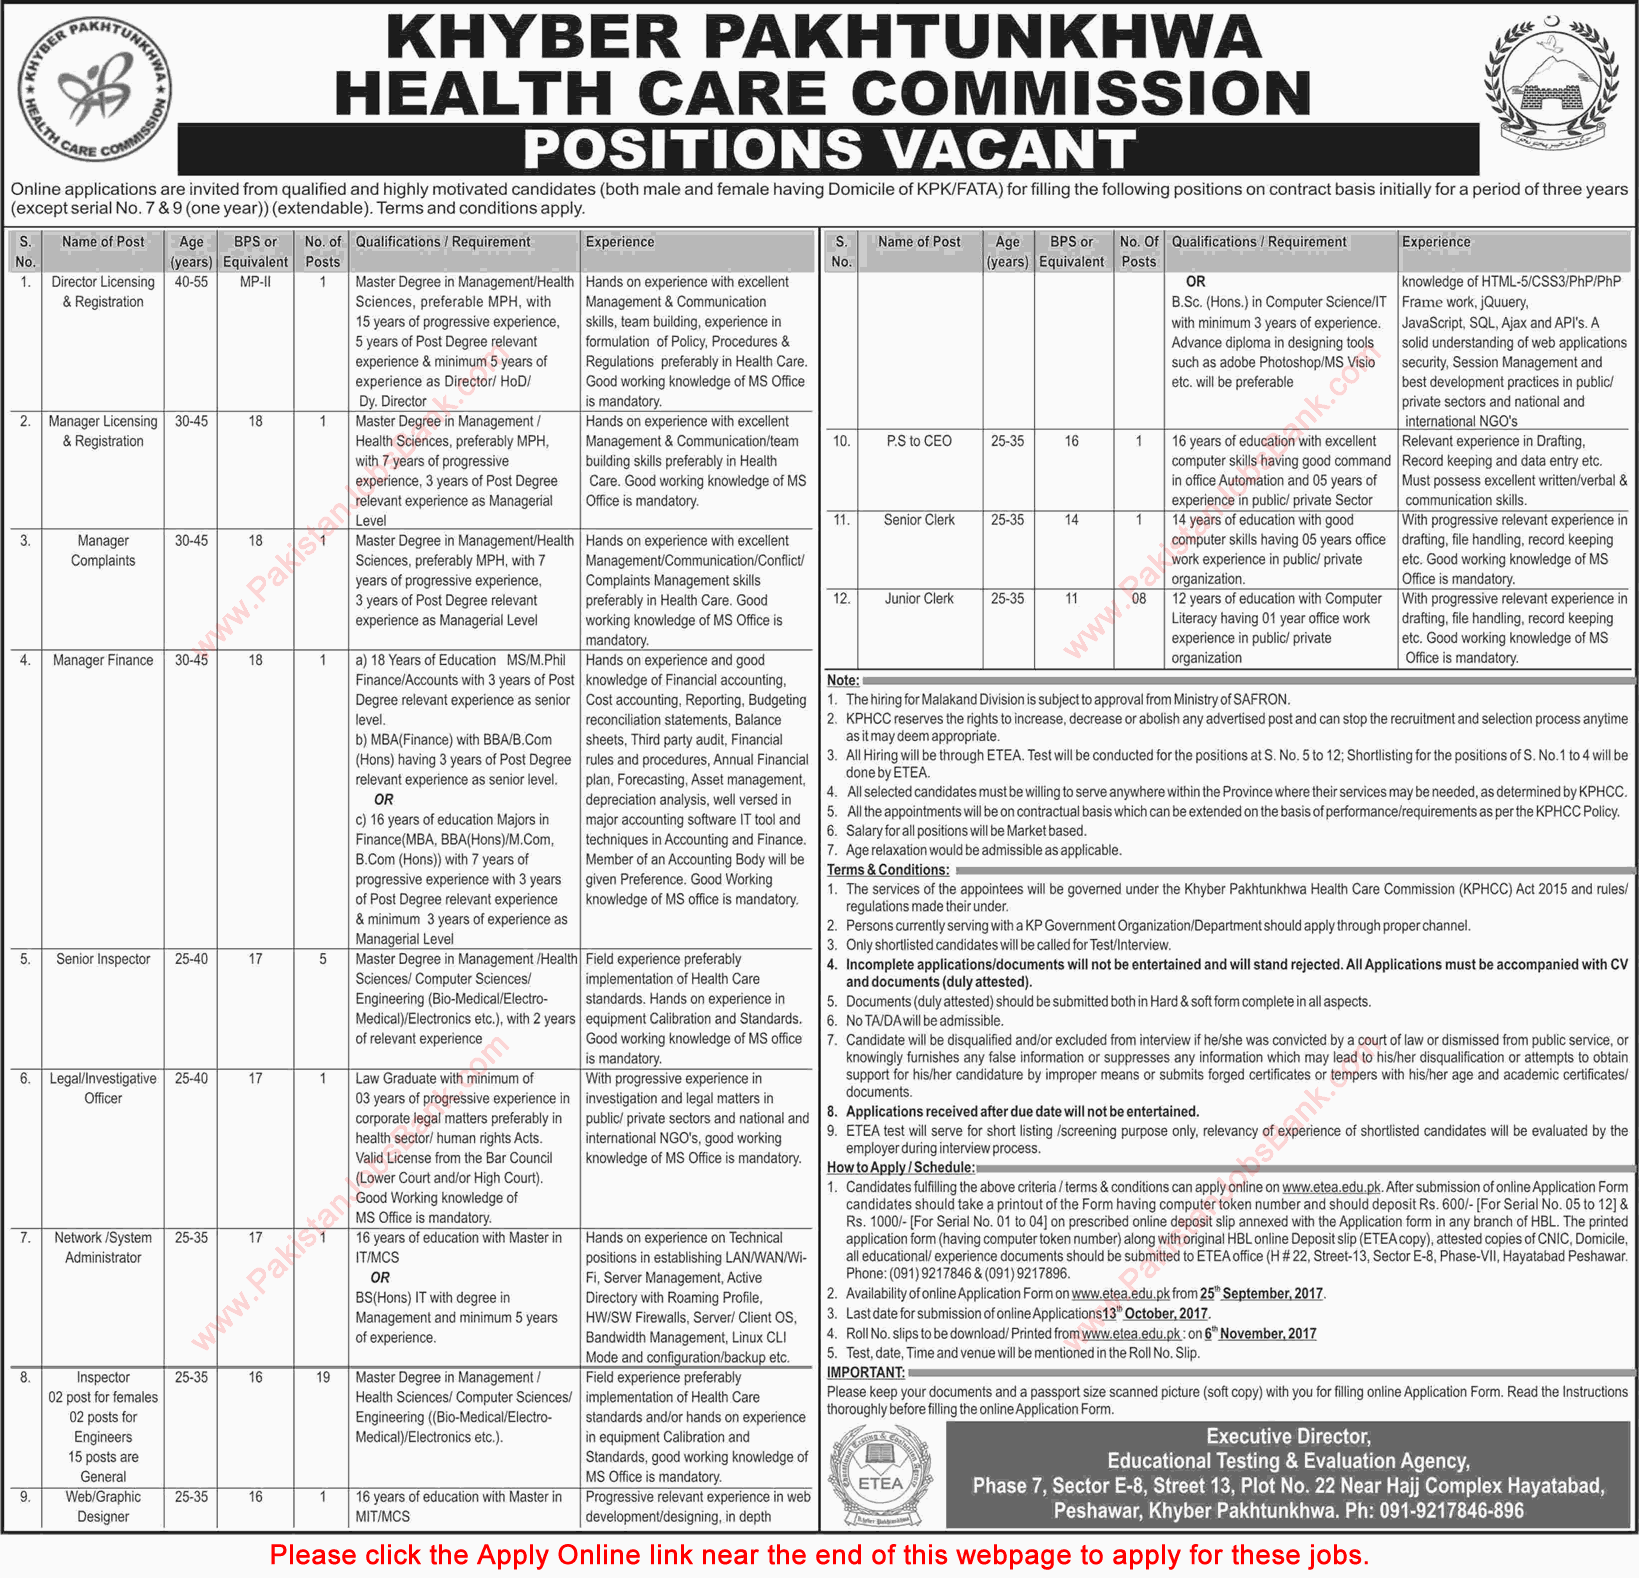 Khyber Pakhtunkhwa Healthcare Commission Jobs 2017 September Apply Online Inspectors, Clerks & Others Latest